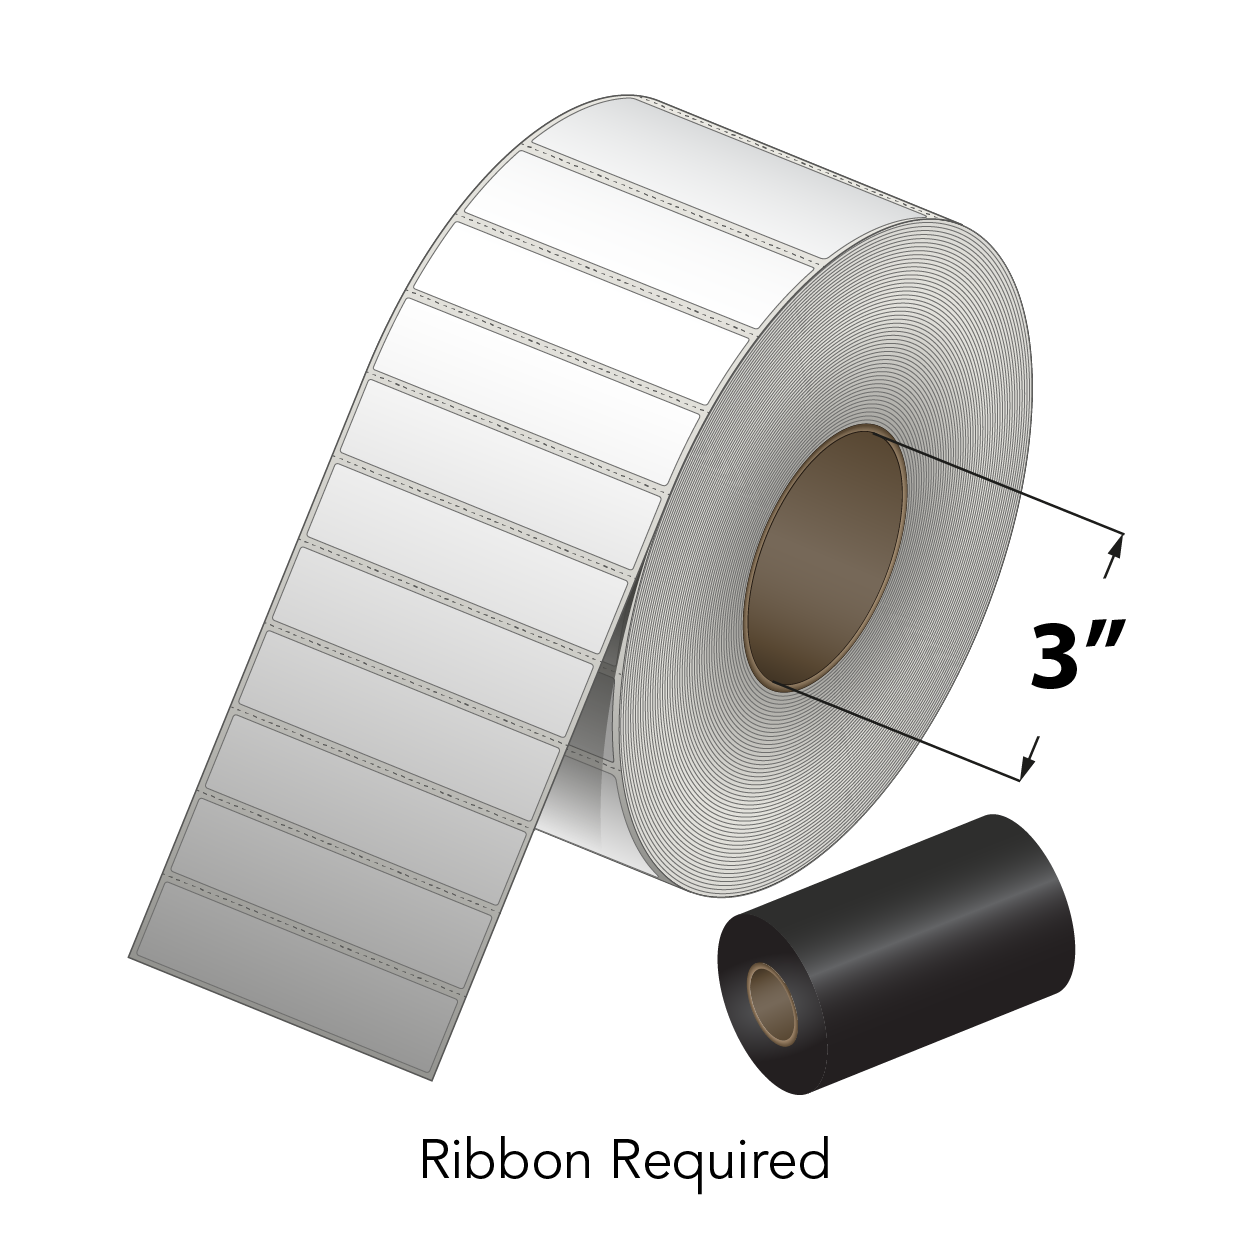 Thermal Transfer Label Rolls With 3" Cores